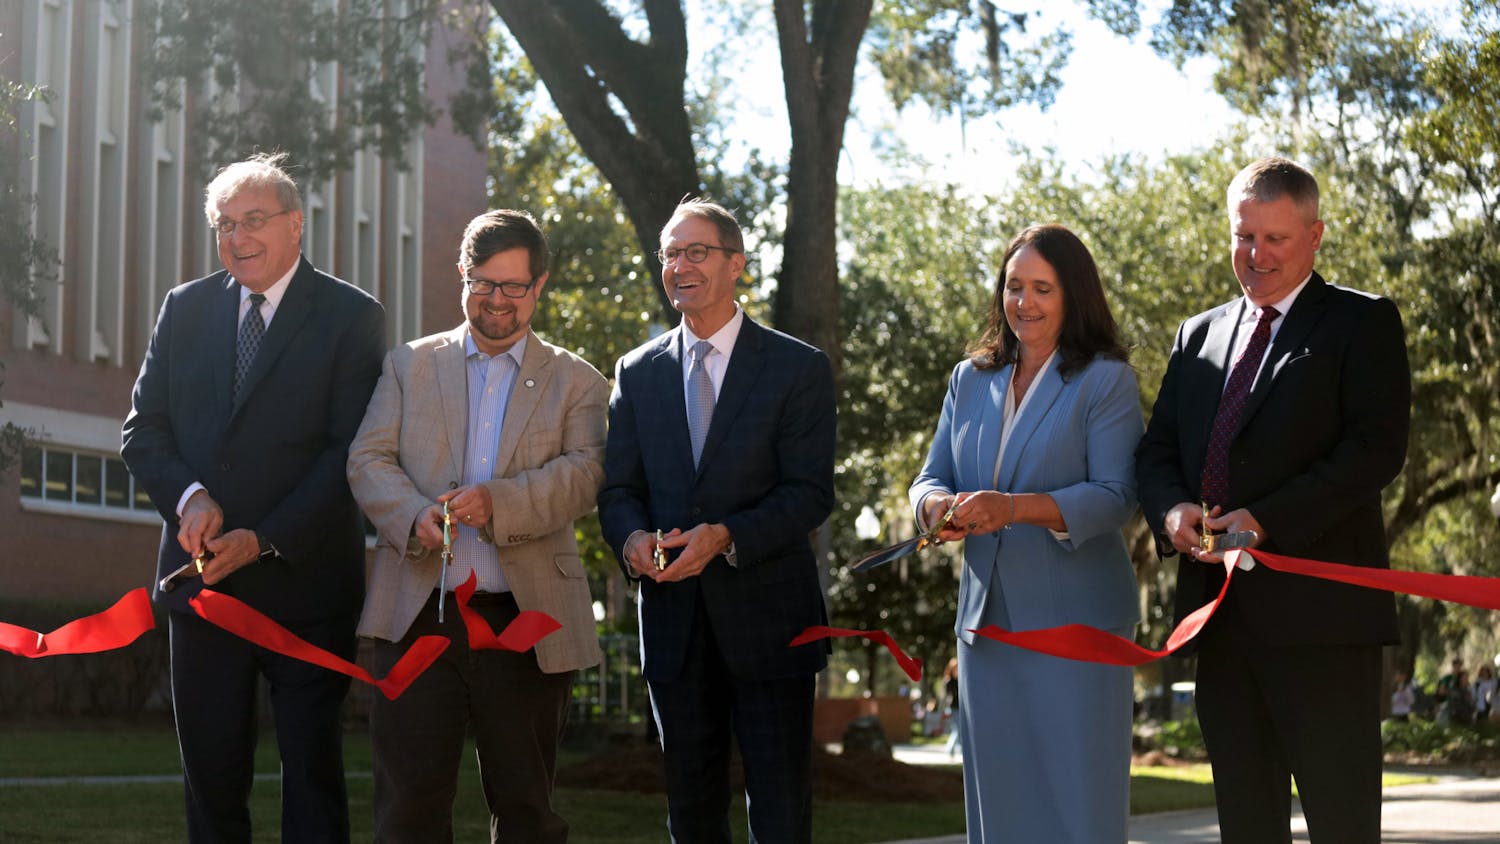 UF President Kent Fuchs, Mayor Lauren Poe and other contributors cut the ribbon at the Newell Gateway Ribbon Cutting Ceremony Wednesday, Oct. 19, 2022.